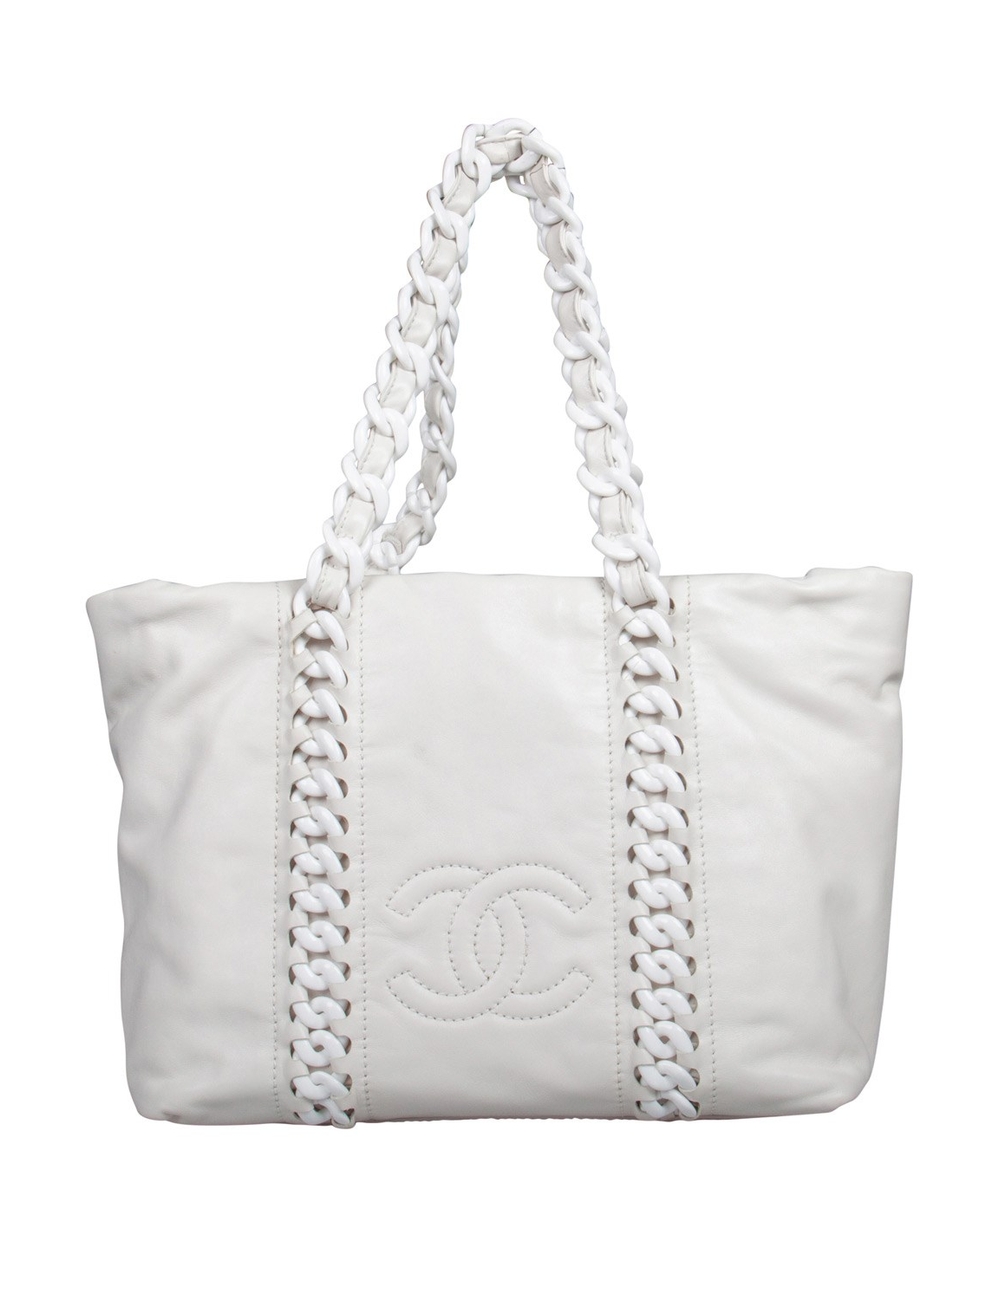 The Rhodoid tote combines classic Chanel with edgy detailing, creating a unique, modern day bag. Its